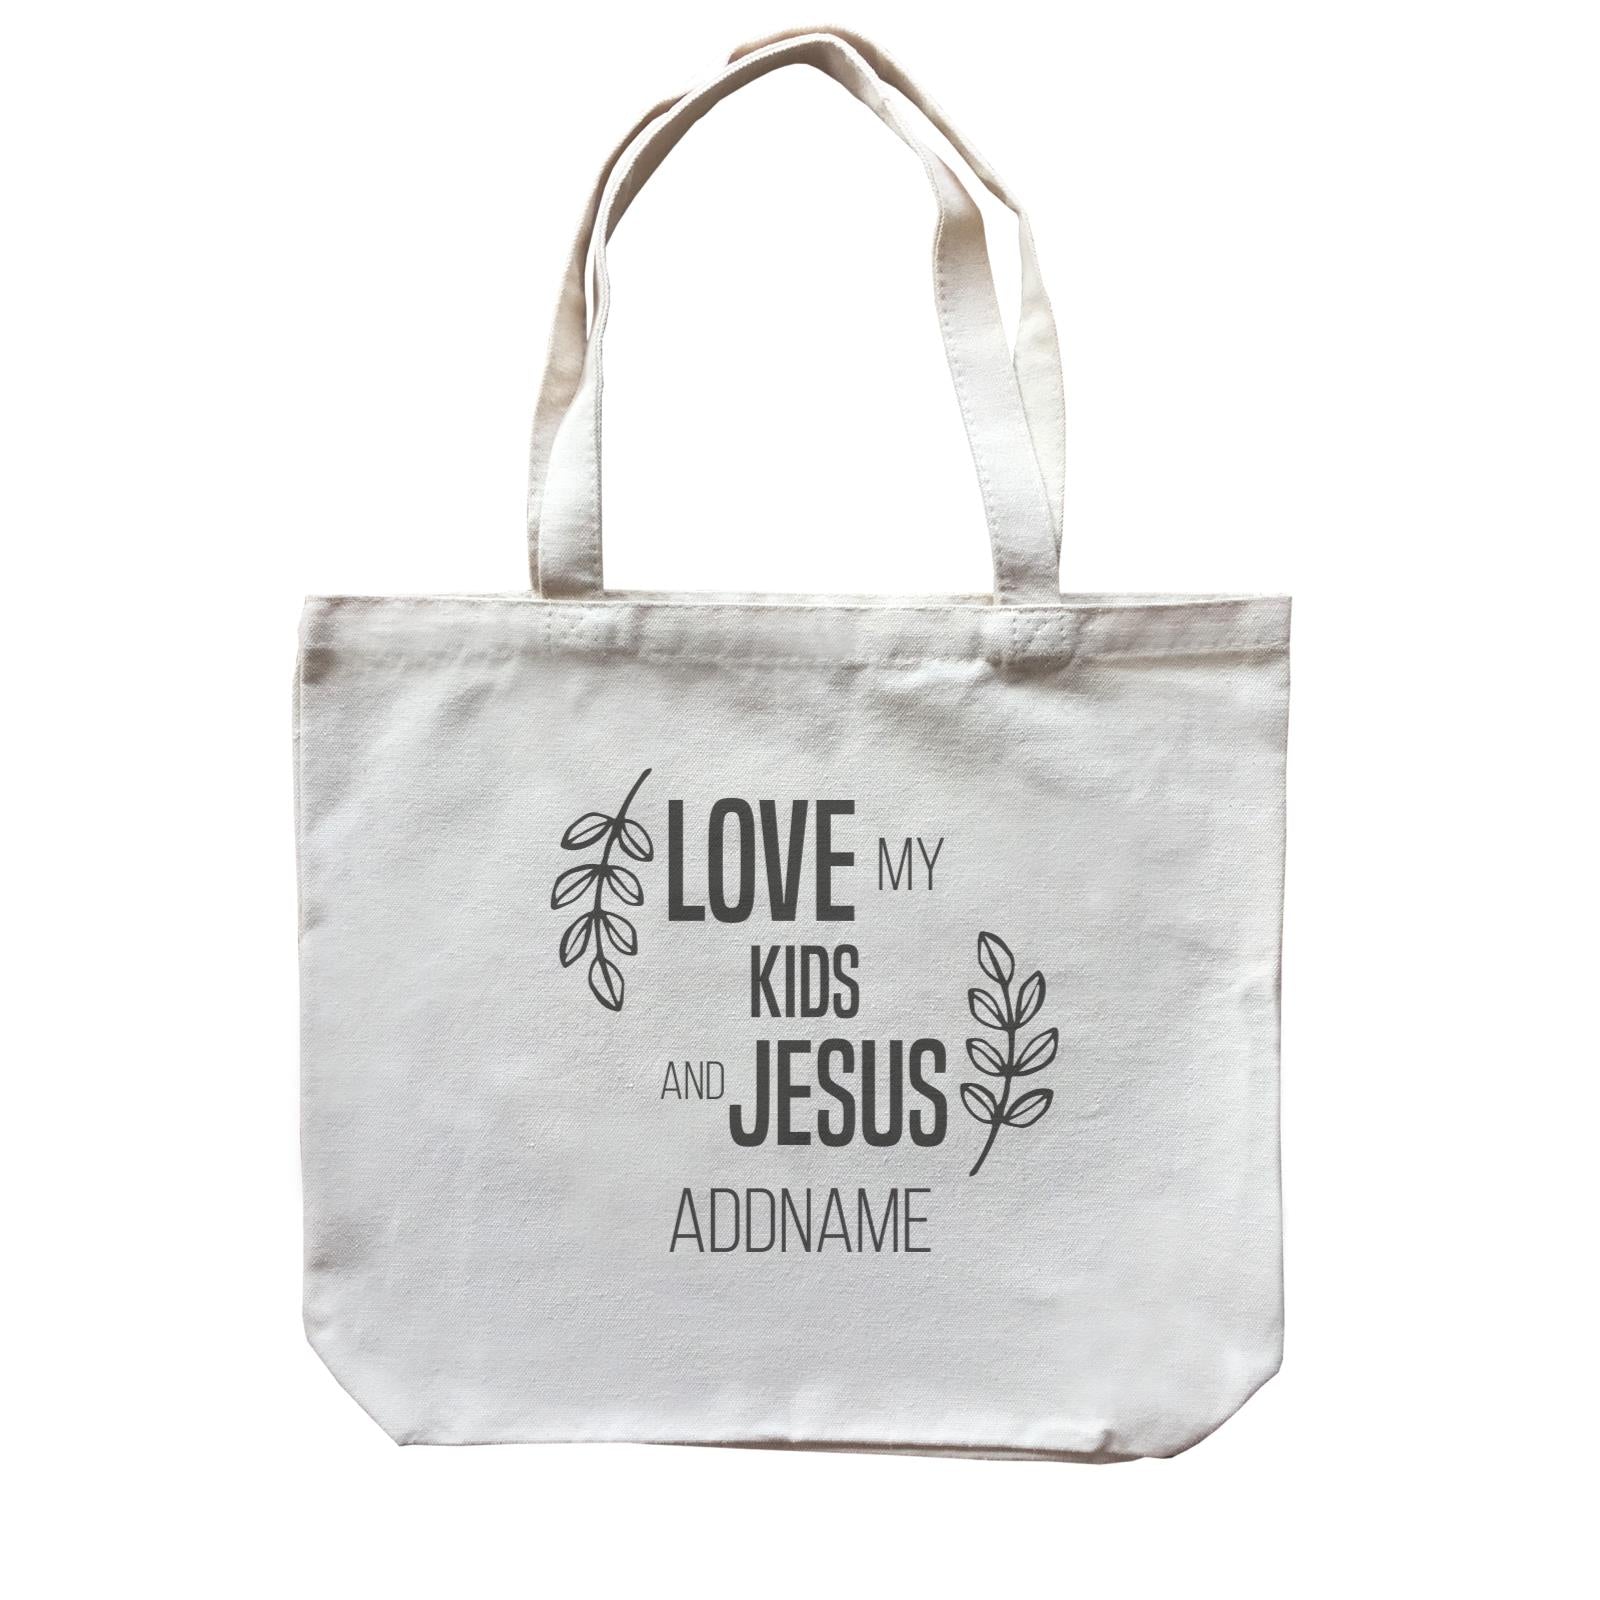 Christian Series Love My Kids And Jesus Addname Canvas Bag